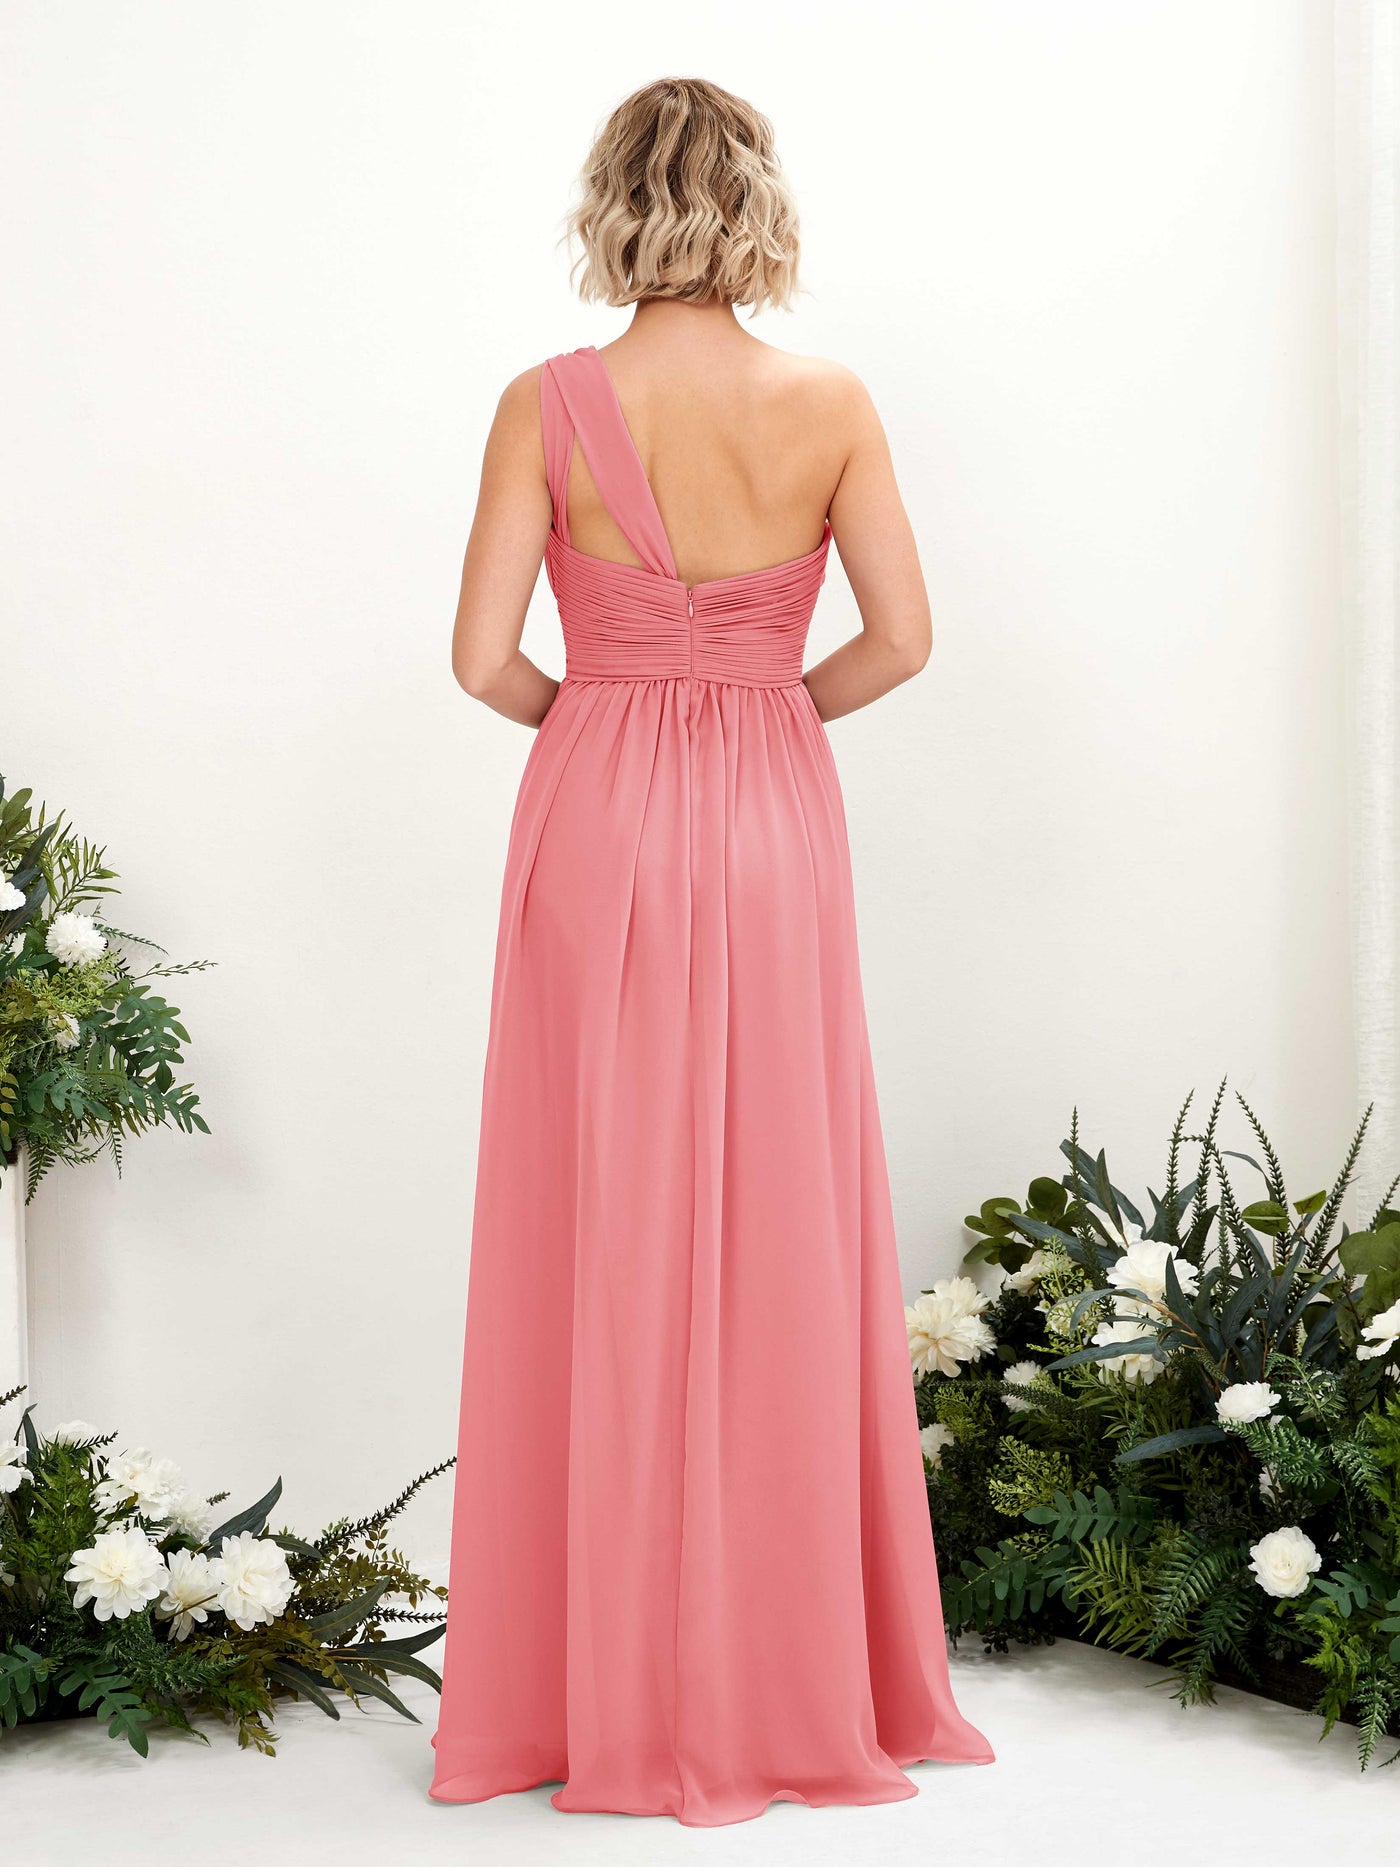 Coral Pink Bridesmaid Dresses Bridesmaid Dress Ball Gown Chiffon One Shoulder Full Length Sleeveless Wedding Party Dress (81225030)#color_coral-pink